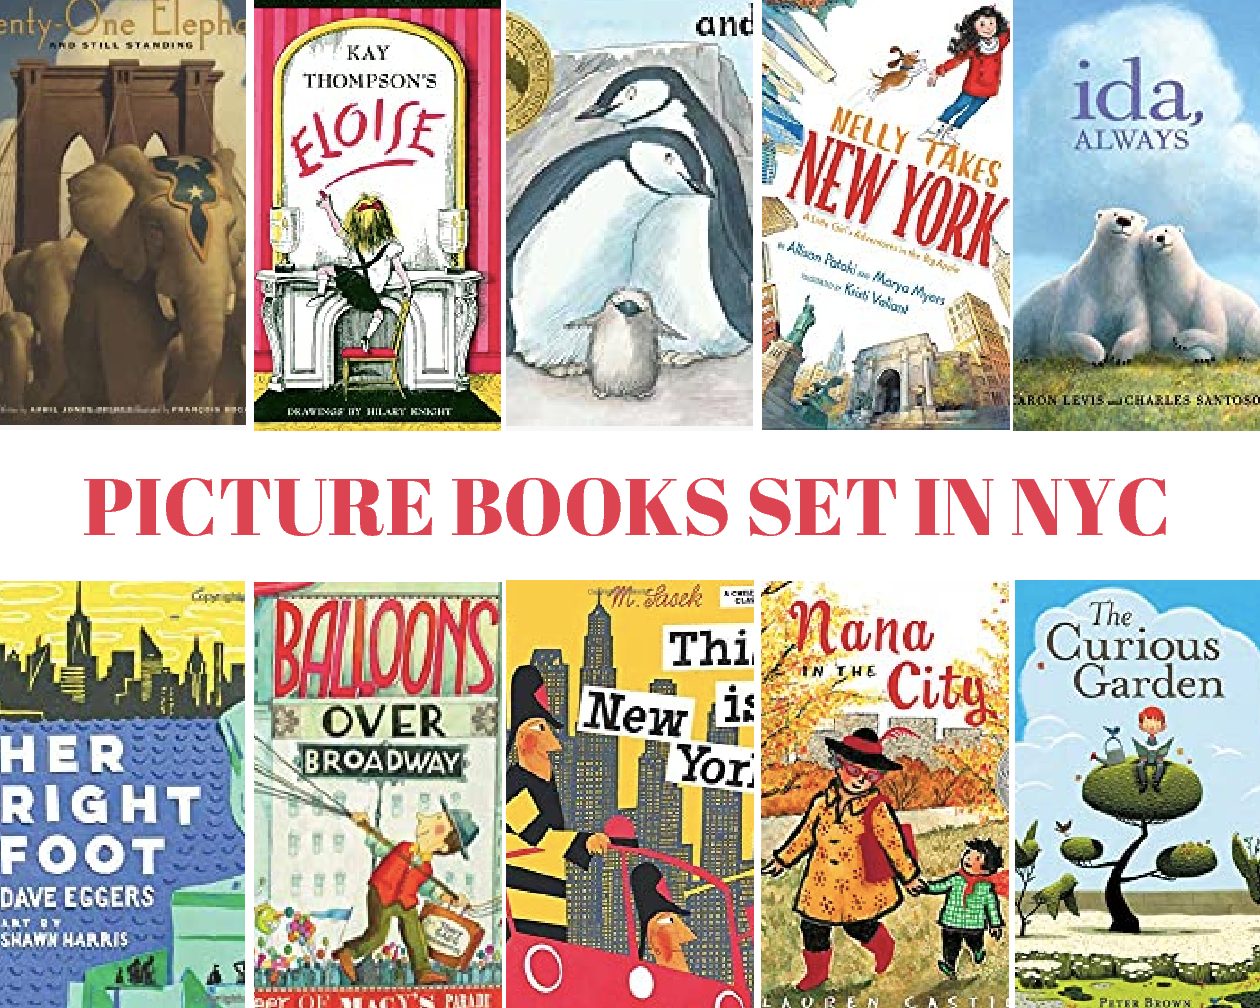 Books About New York City That Kids